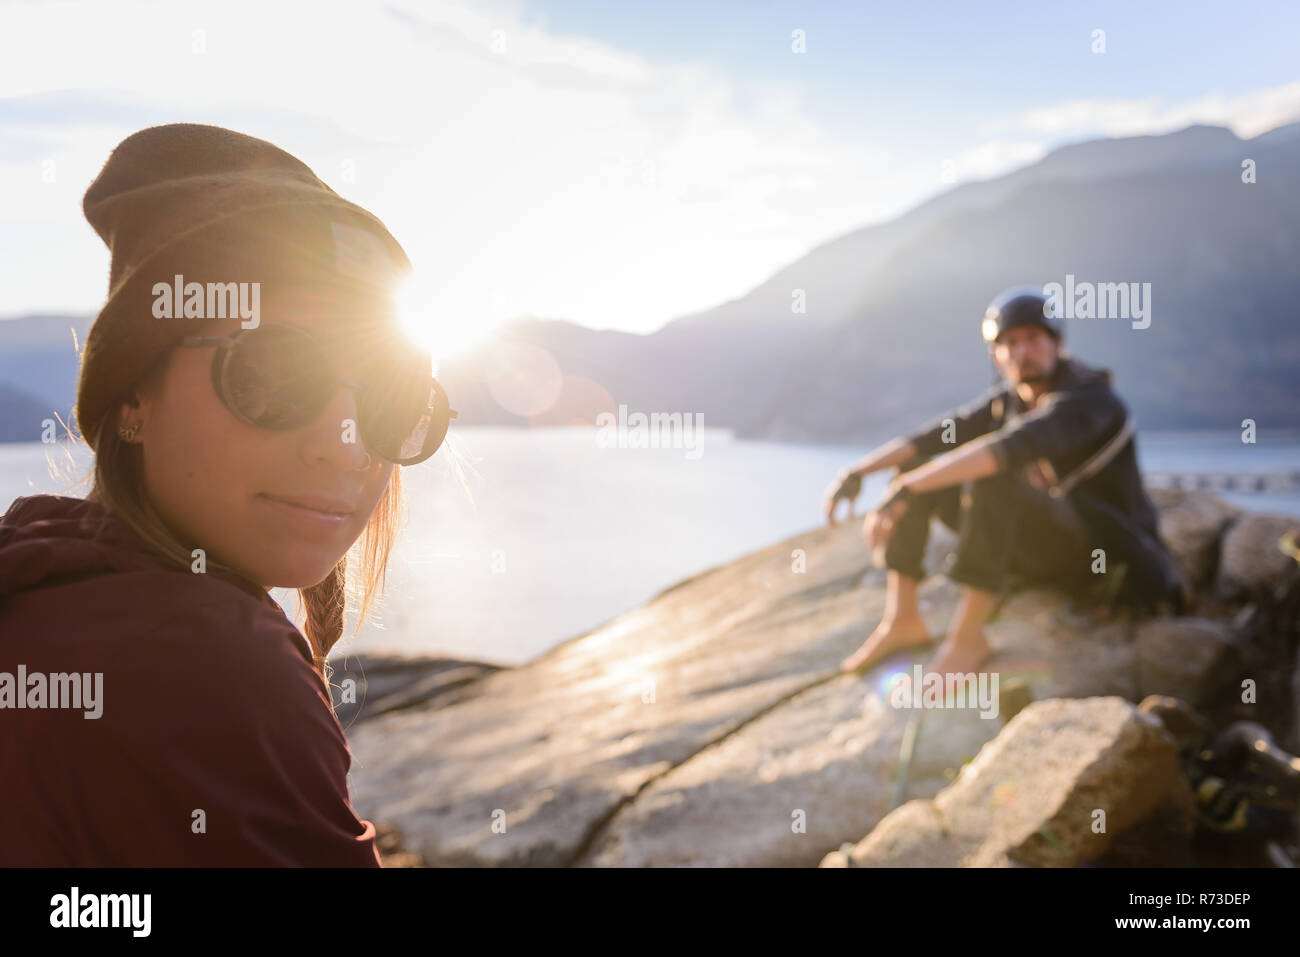 Rock climber couple on Malamute, Squamish, Canada Banque D'Images